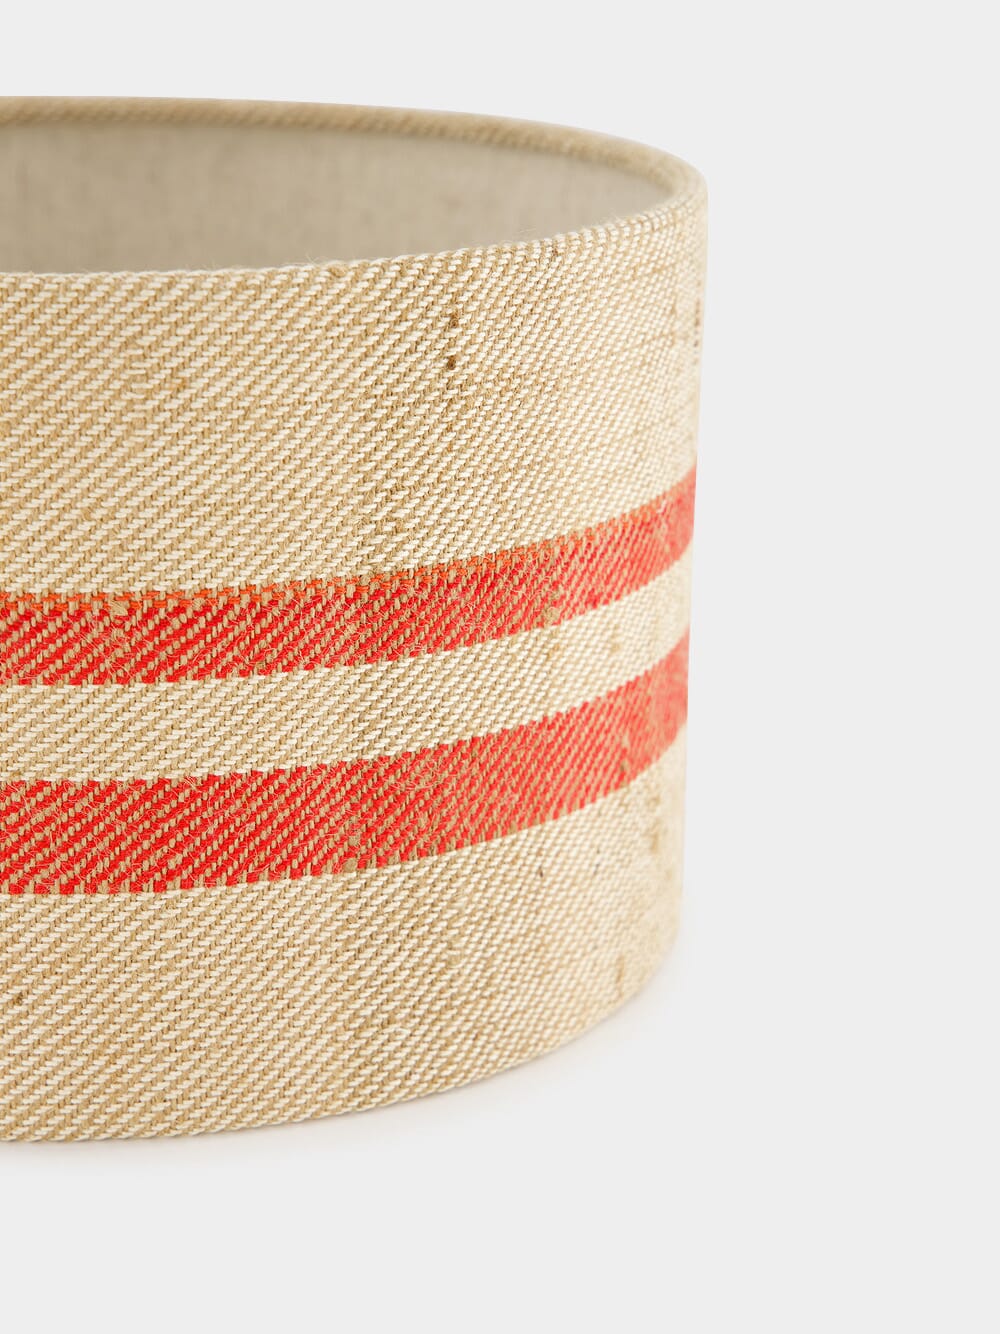 Striped Small Red Lampshade